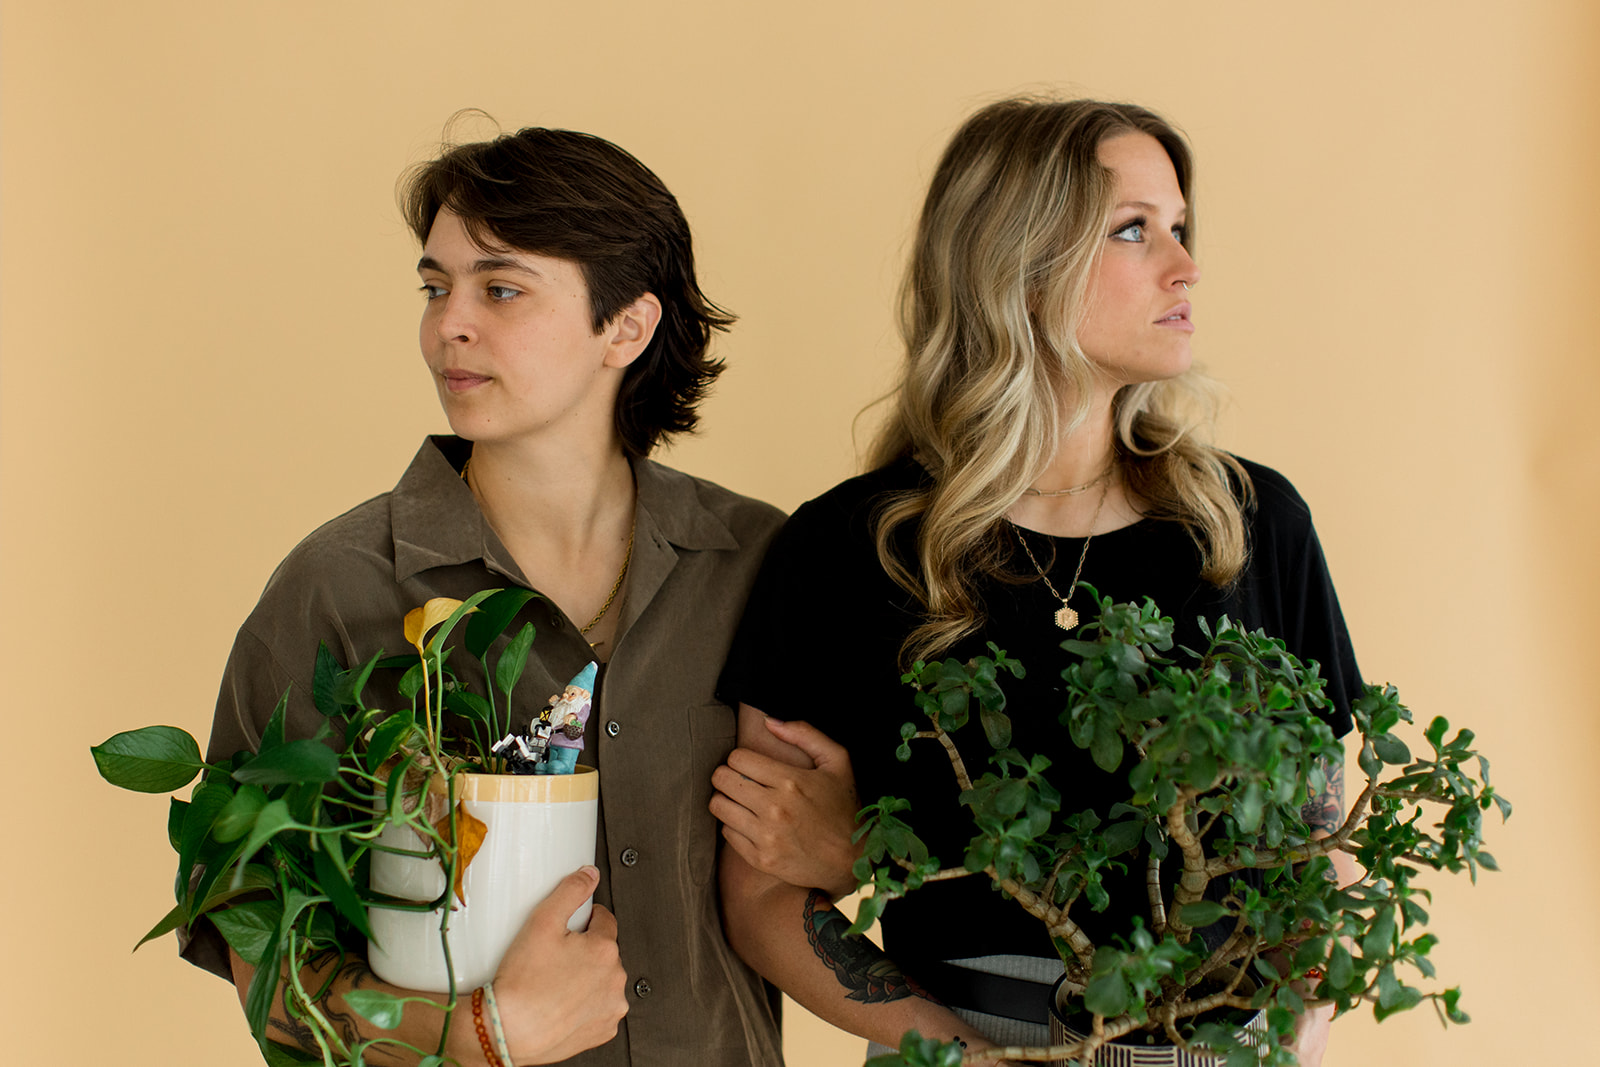 A couple looks in opposite directions while holding their beloved houseplants for a creative photo